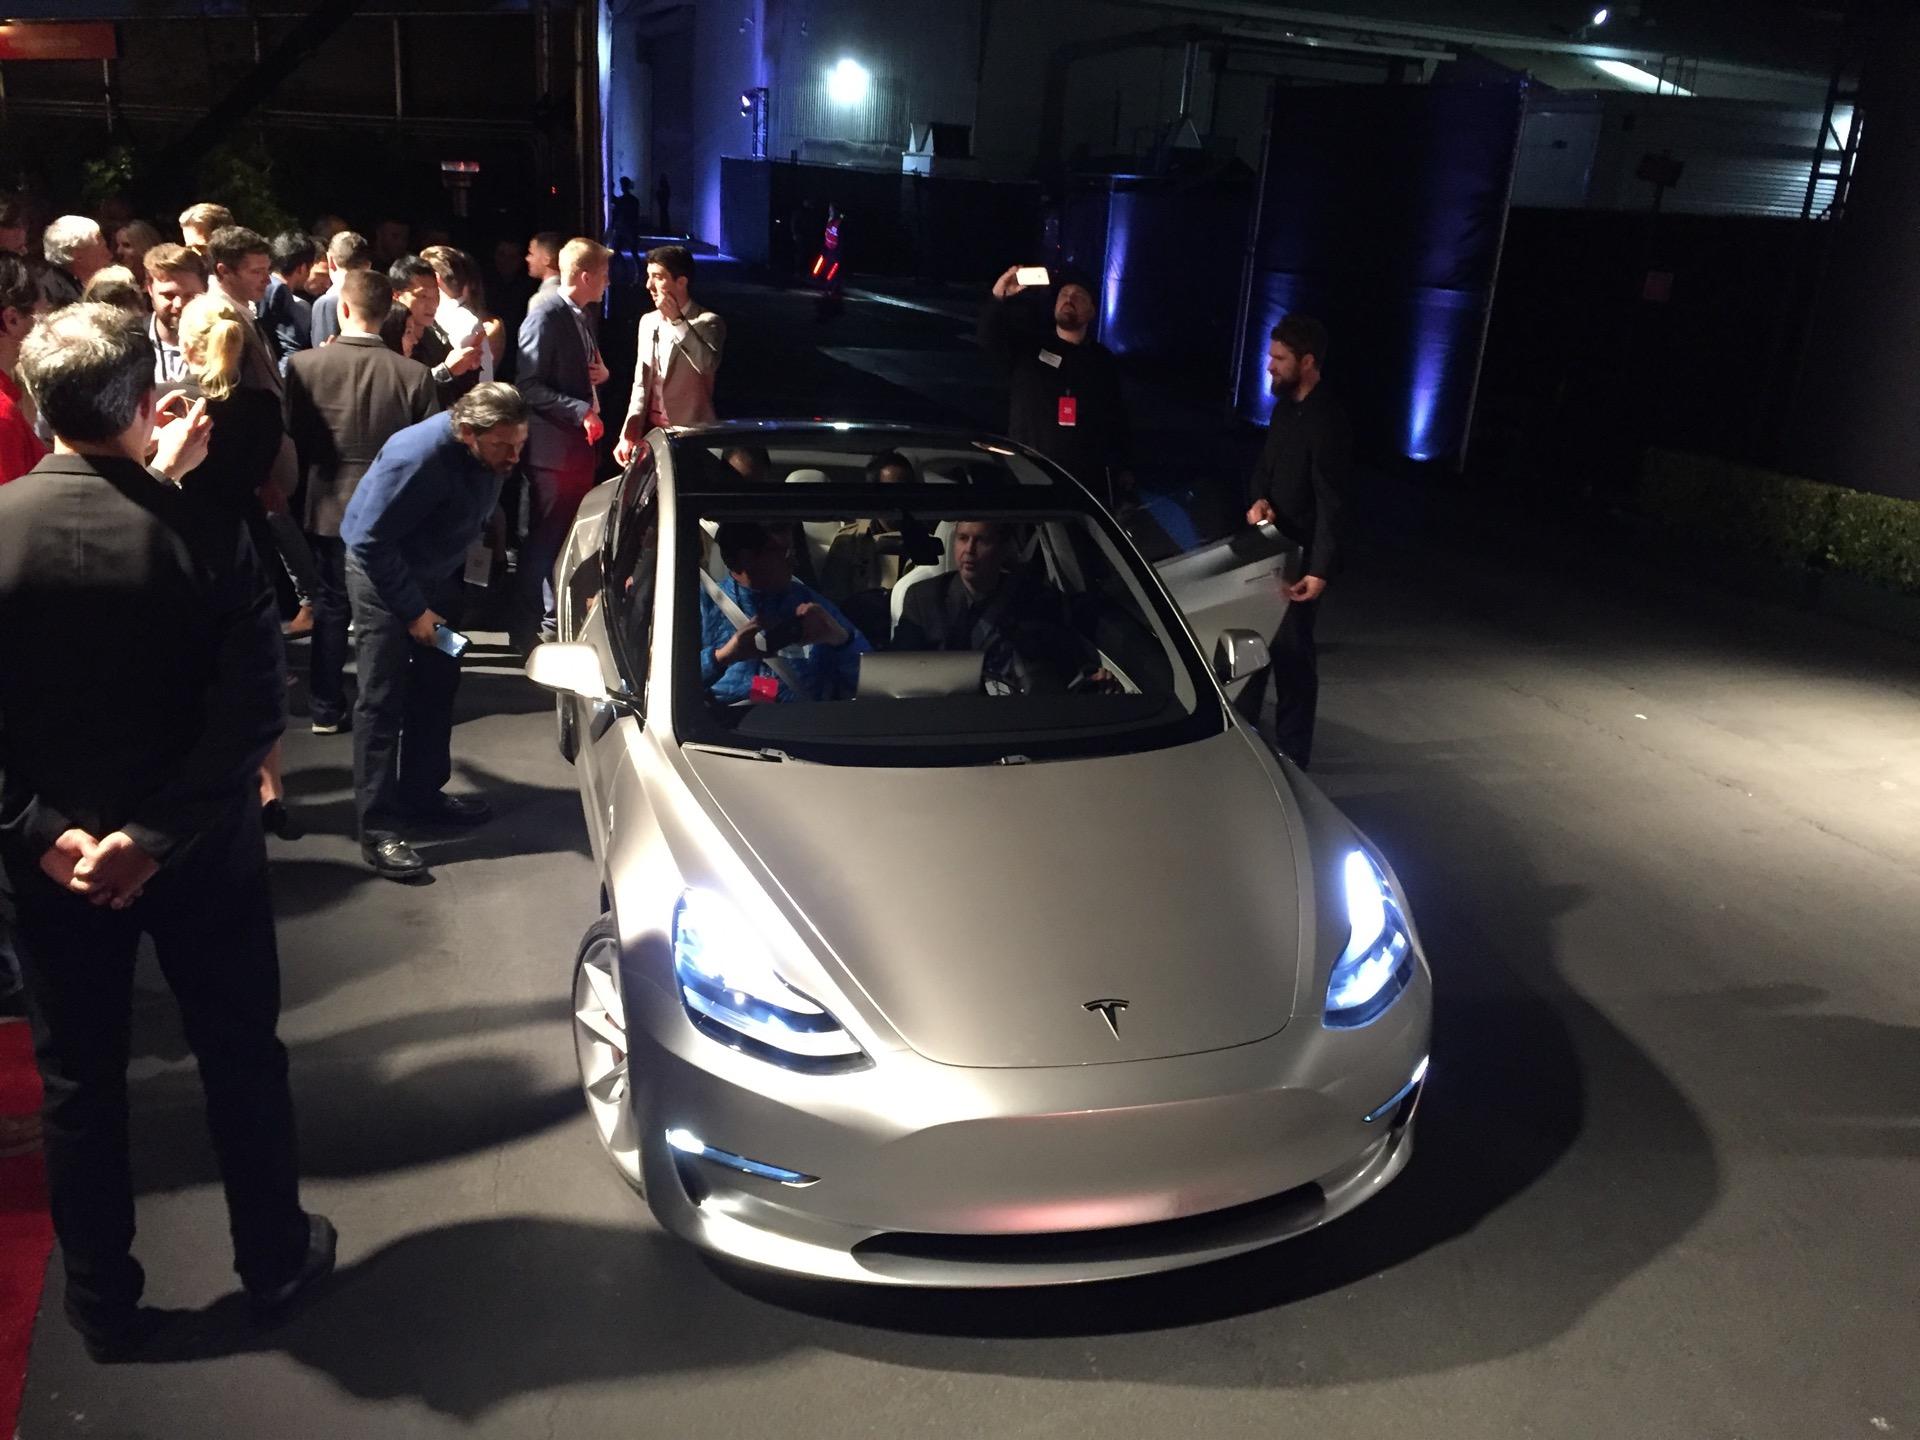 Tesla Model 3 demand startled everyone, even Musk; now what?